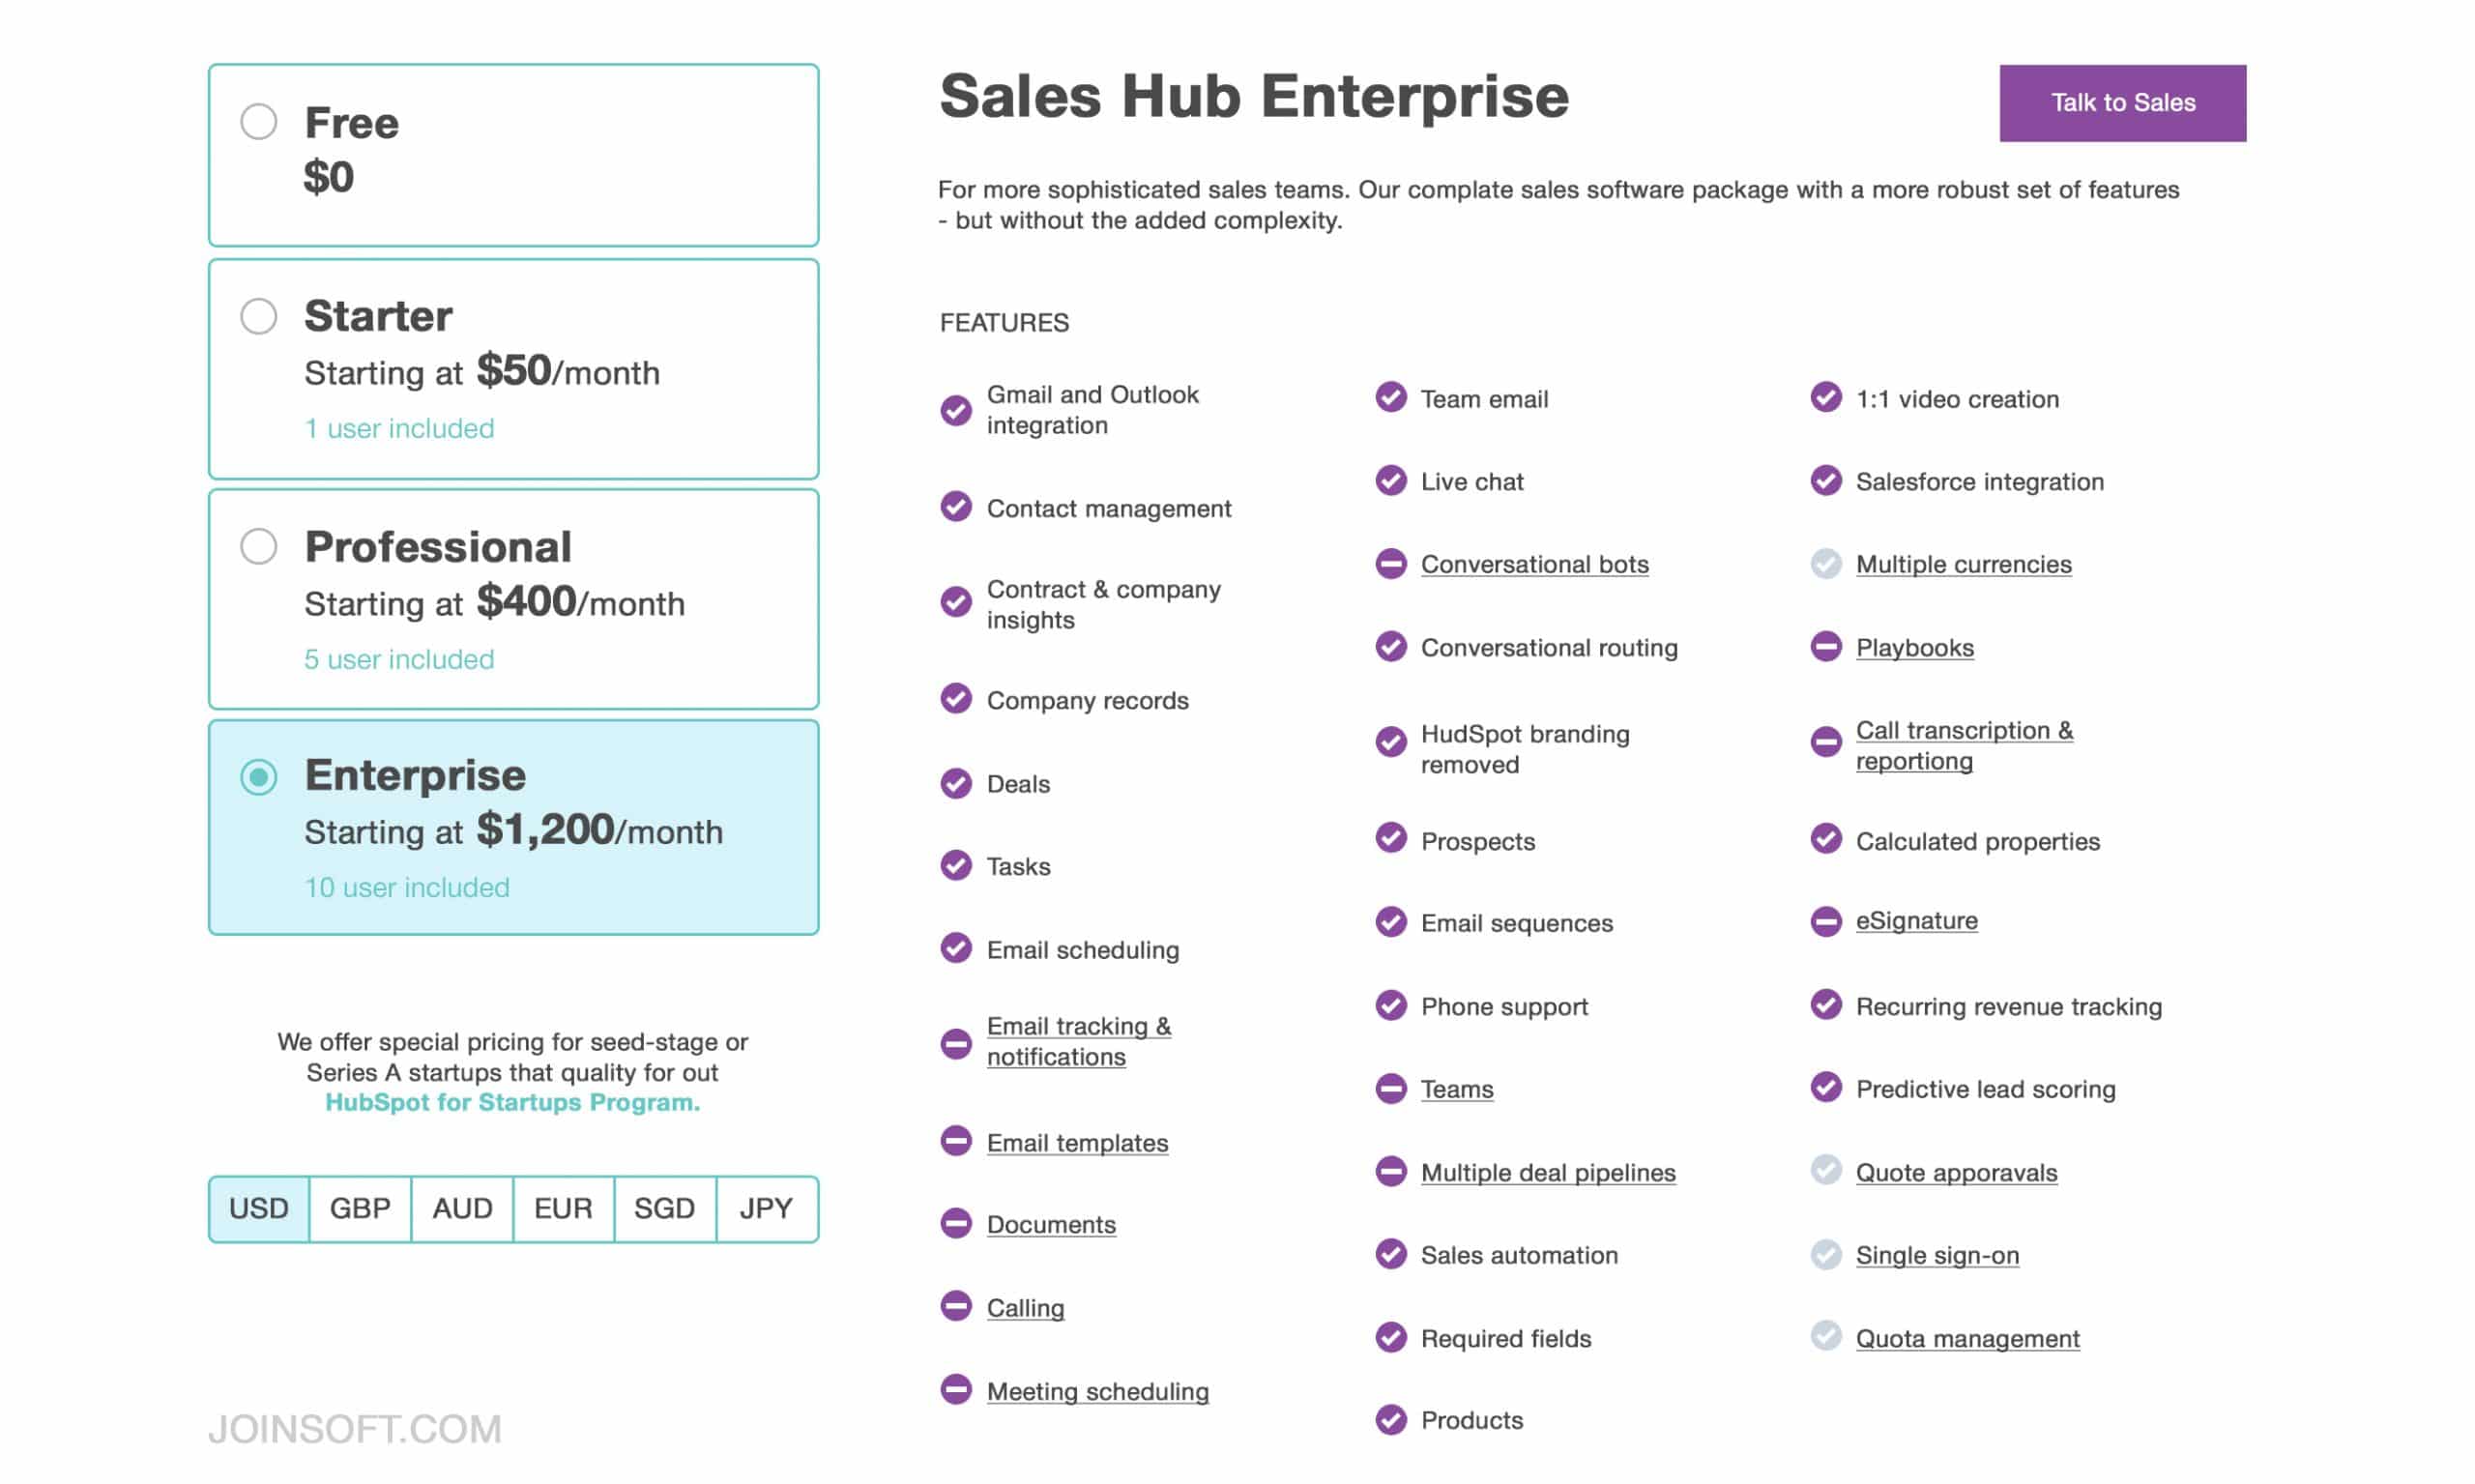 HubSpot Sales Hub offers options for different businesses